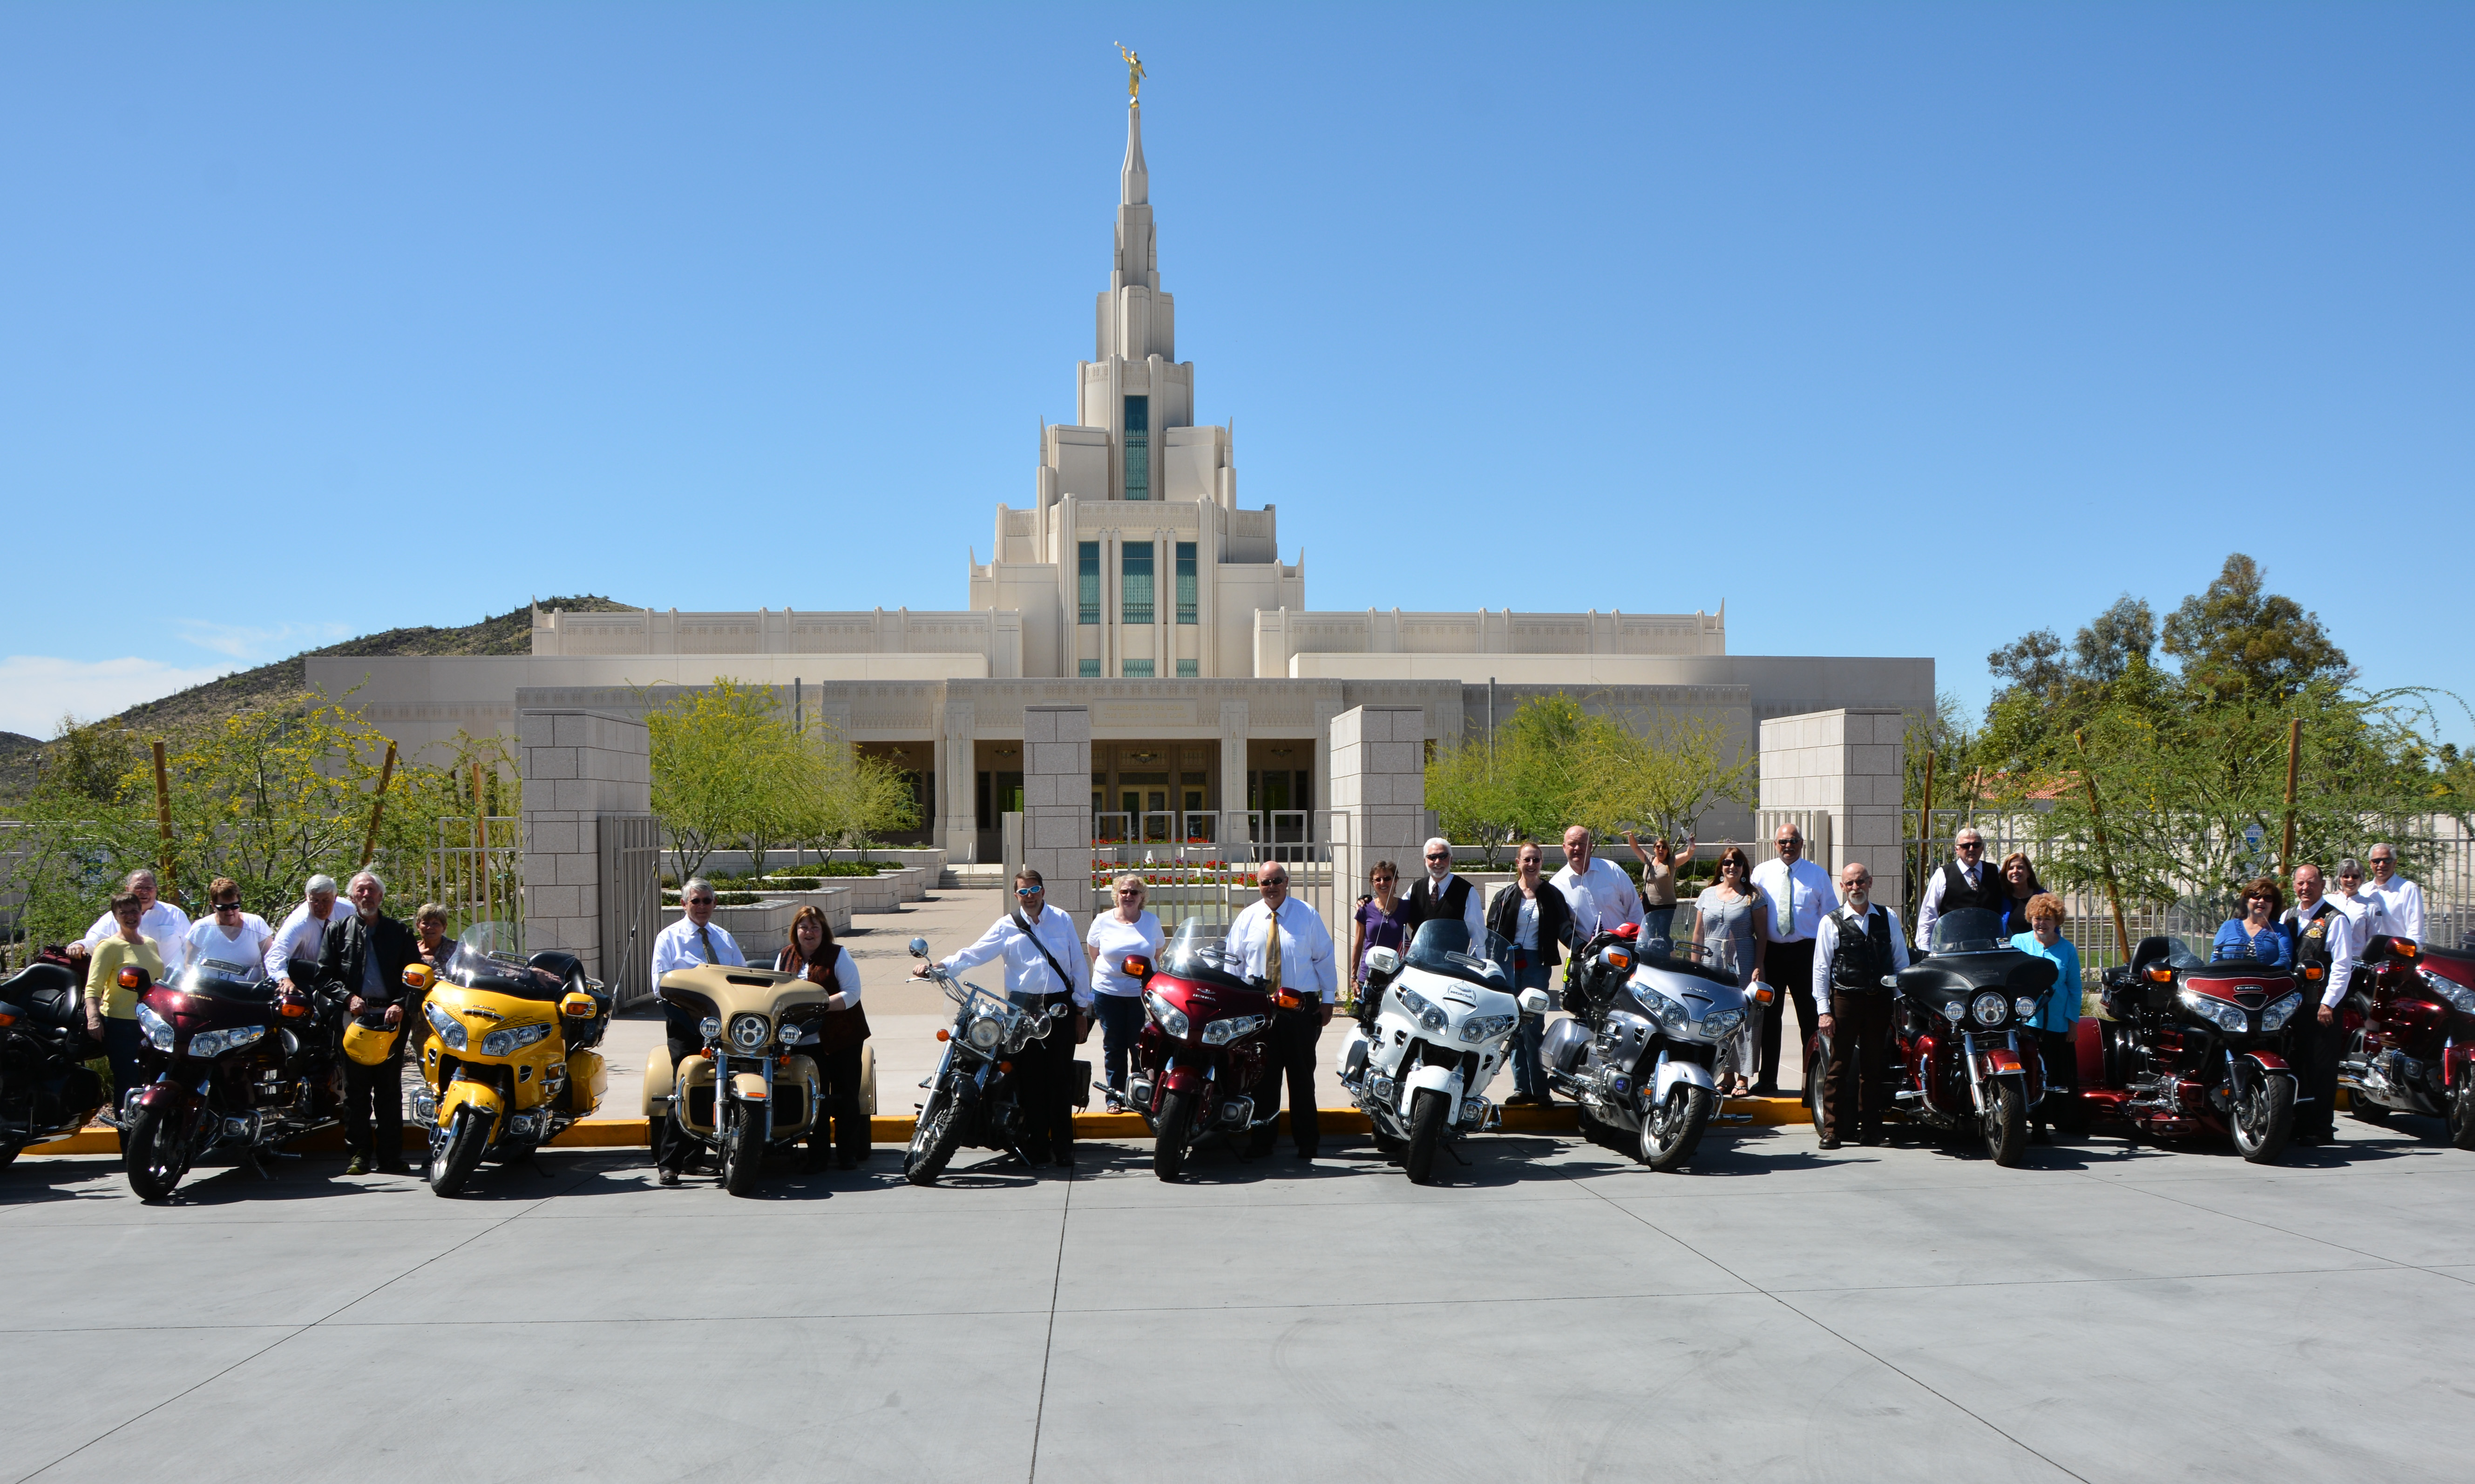 Members of the Temple Riders Association congregate outside of the Phoenix Arizona LDS Temple. The association is a group of motorcyclists who travel to temples throughout the U.S. and Canada and live standards of The Church of Jesus Christ of Latter-day Saints.